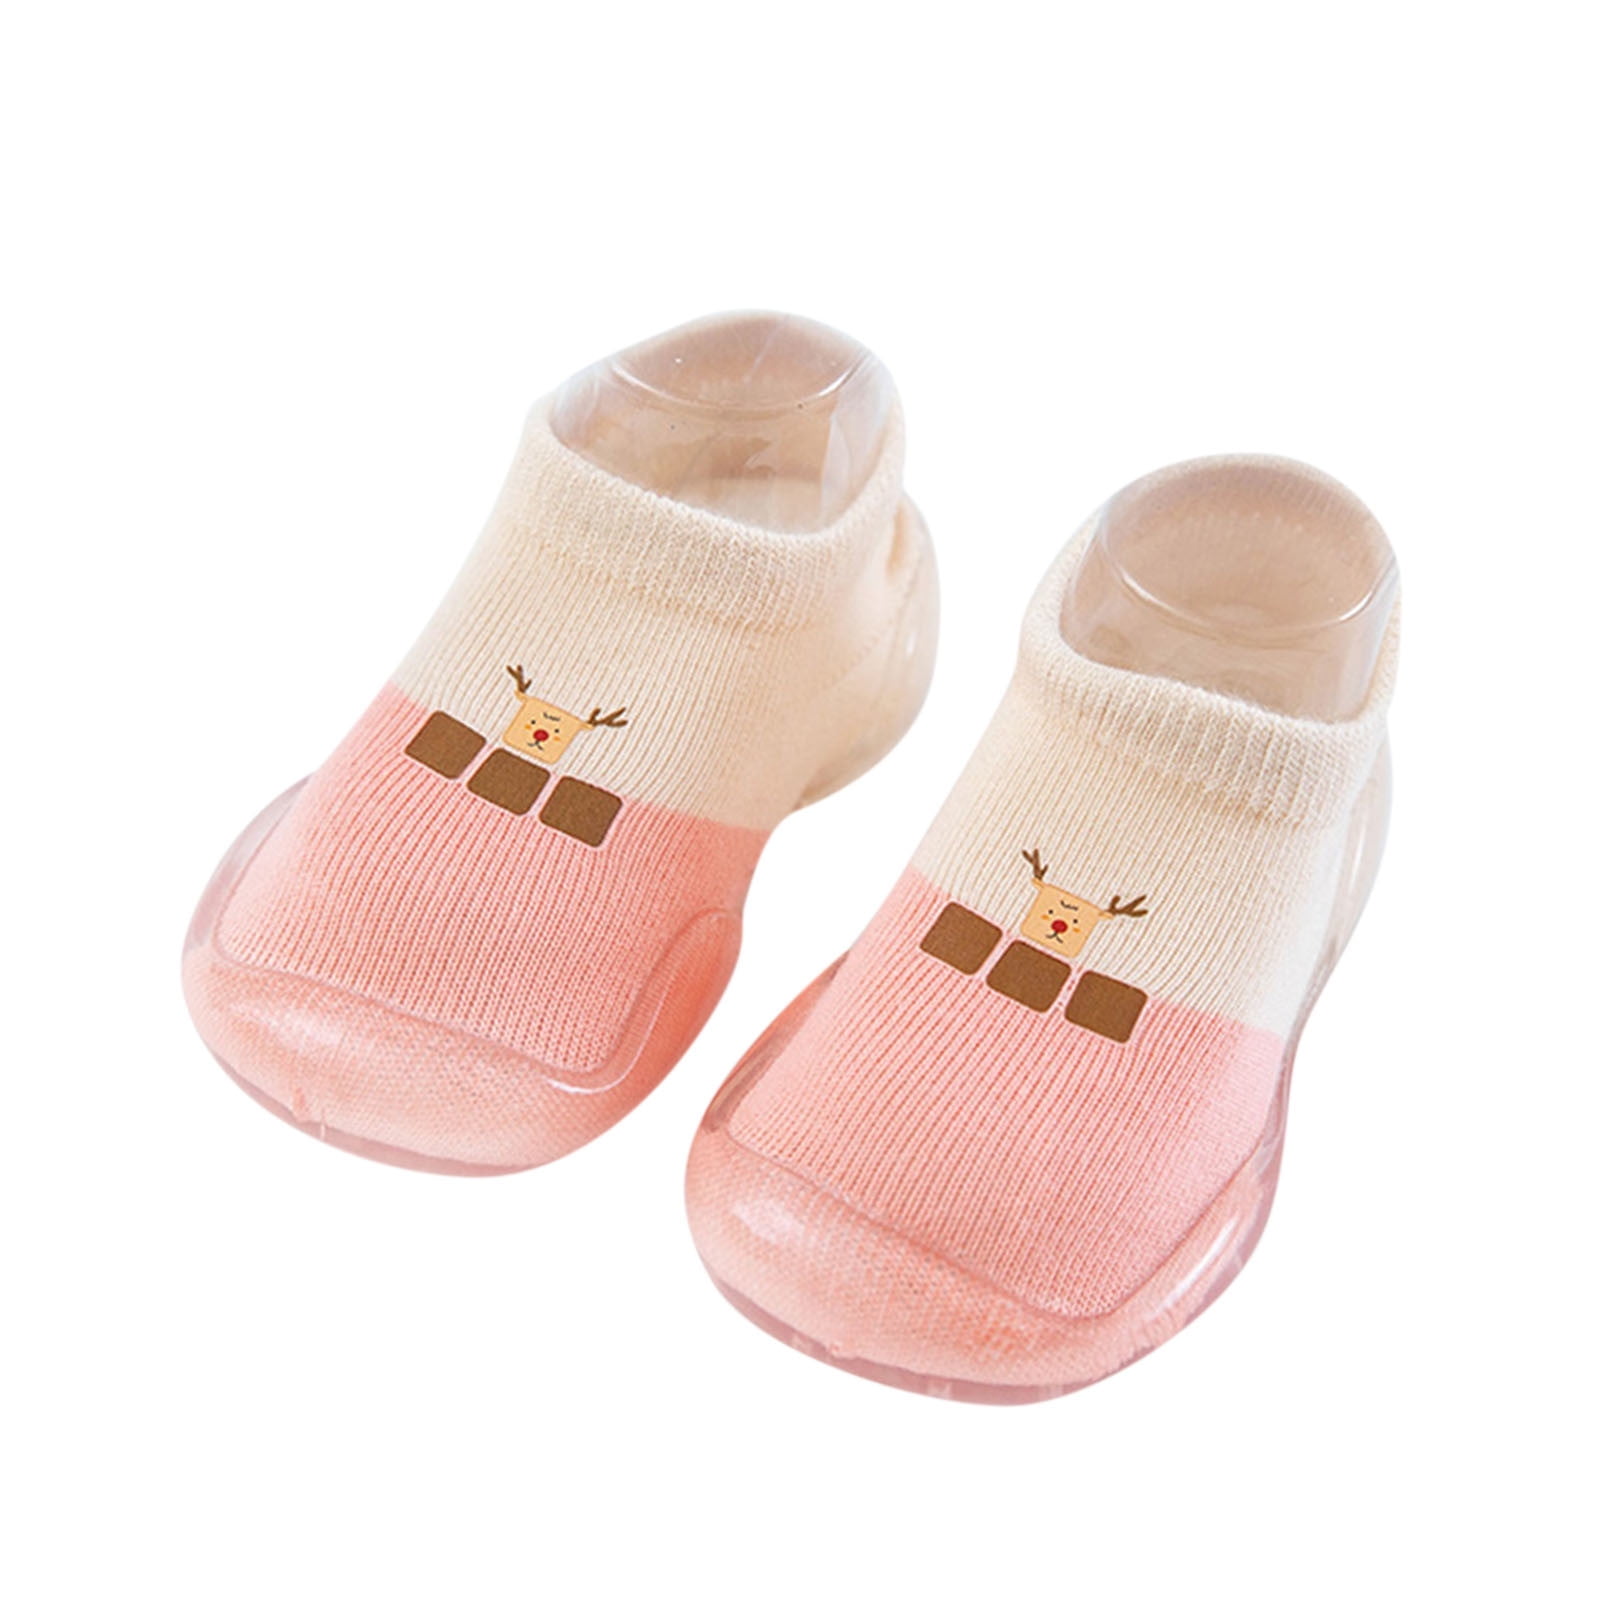 Akiihool Baby Non-skid Shoes Cozy Warm Lightweight Infant Kids House ...